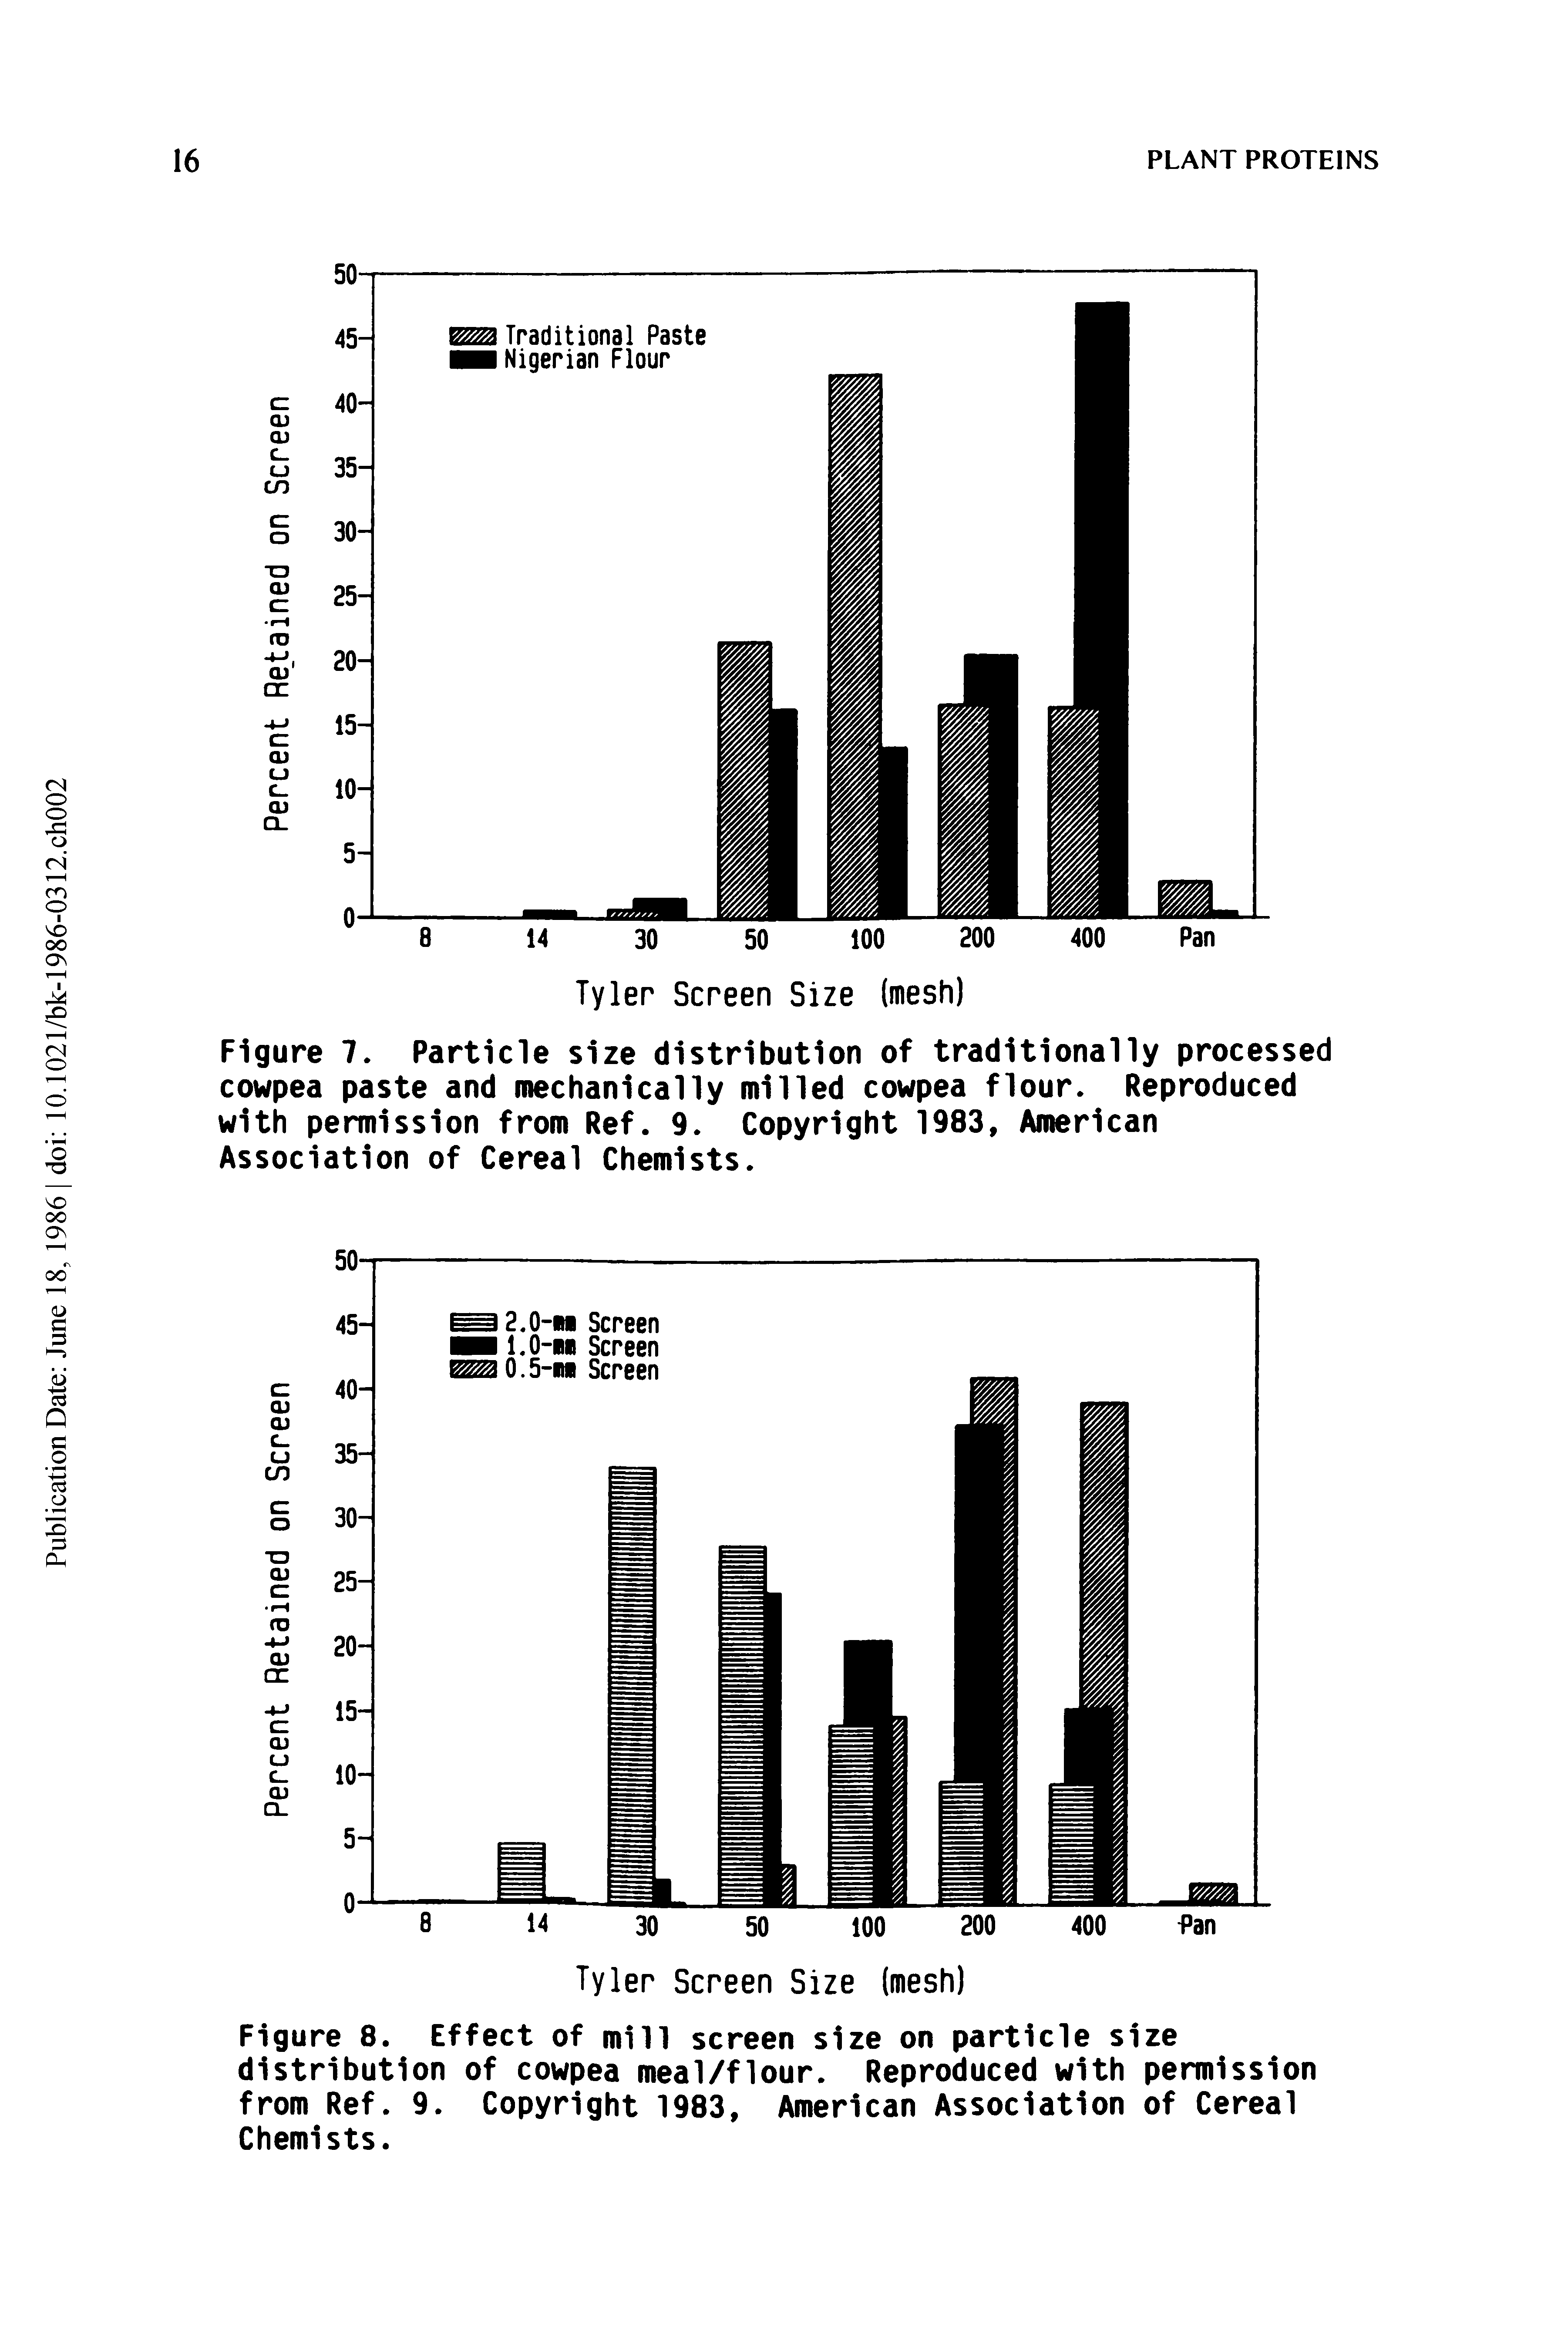 Figure 8. Effect of mill screen size on particle size distribution of cowpea meal/flour. Reproduced with permission from Ref. 9. Copyright 1983, American Association of Cereal Chemists.